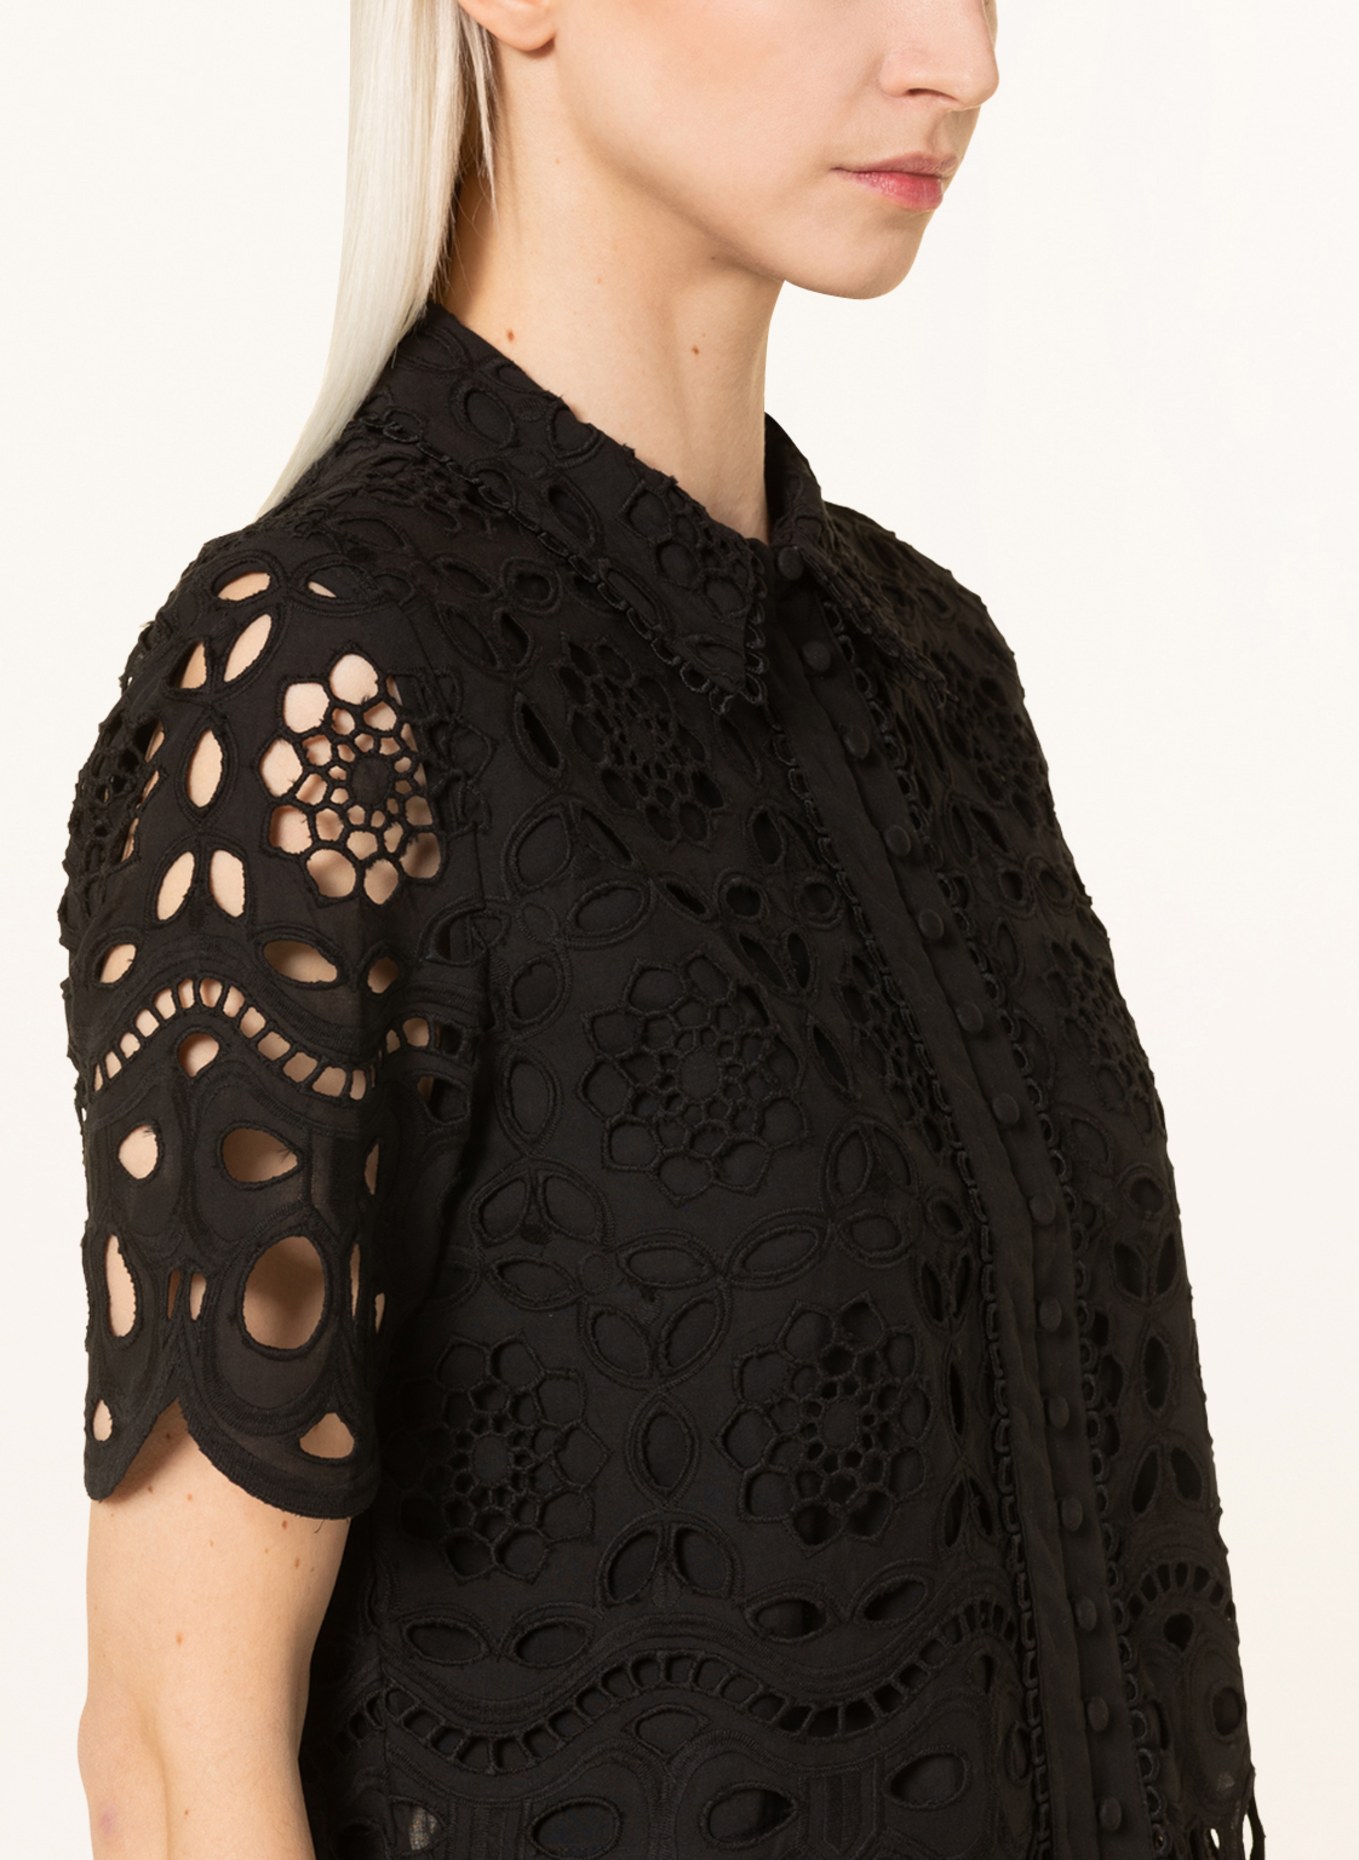 MRS & HUGS Shirt blouse made of lace, Color: BLACK (Image 4)